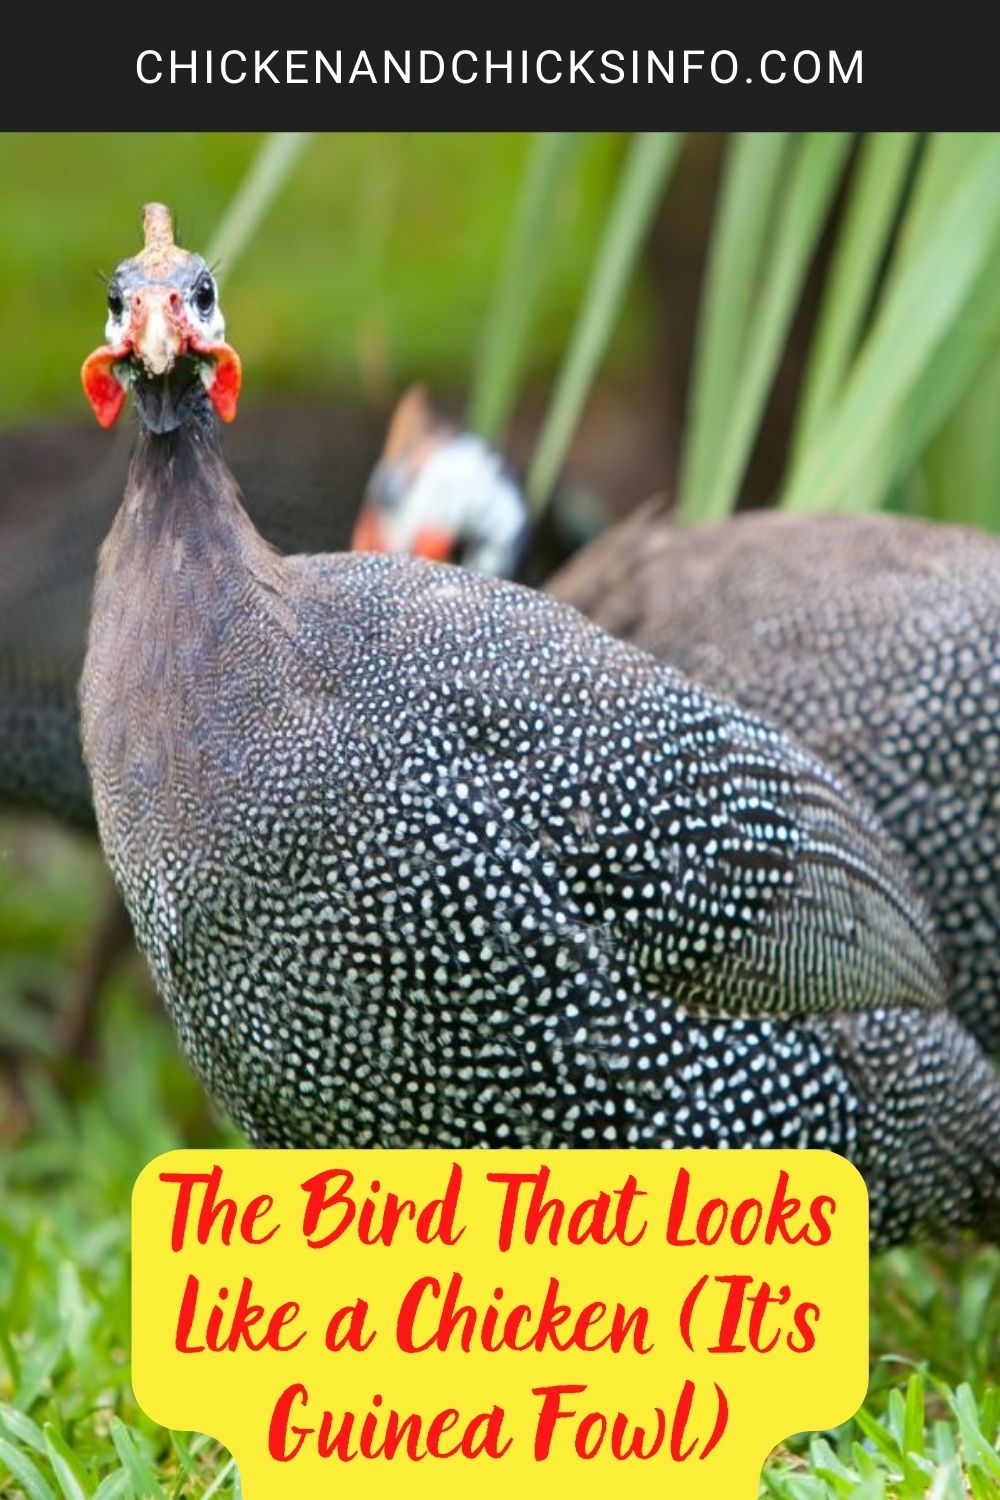 The Bird That Looks Like a Chicken (It's Guinea Fowl) poster.
